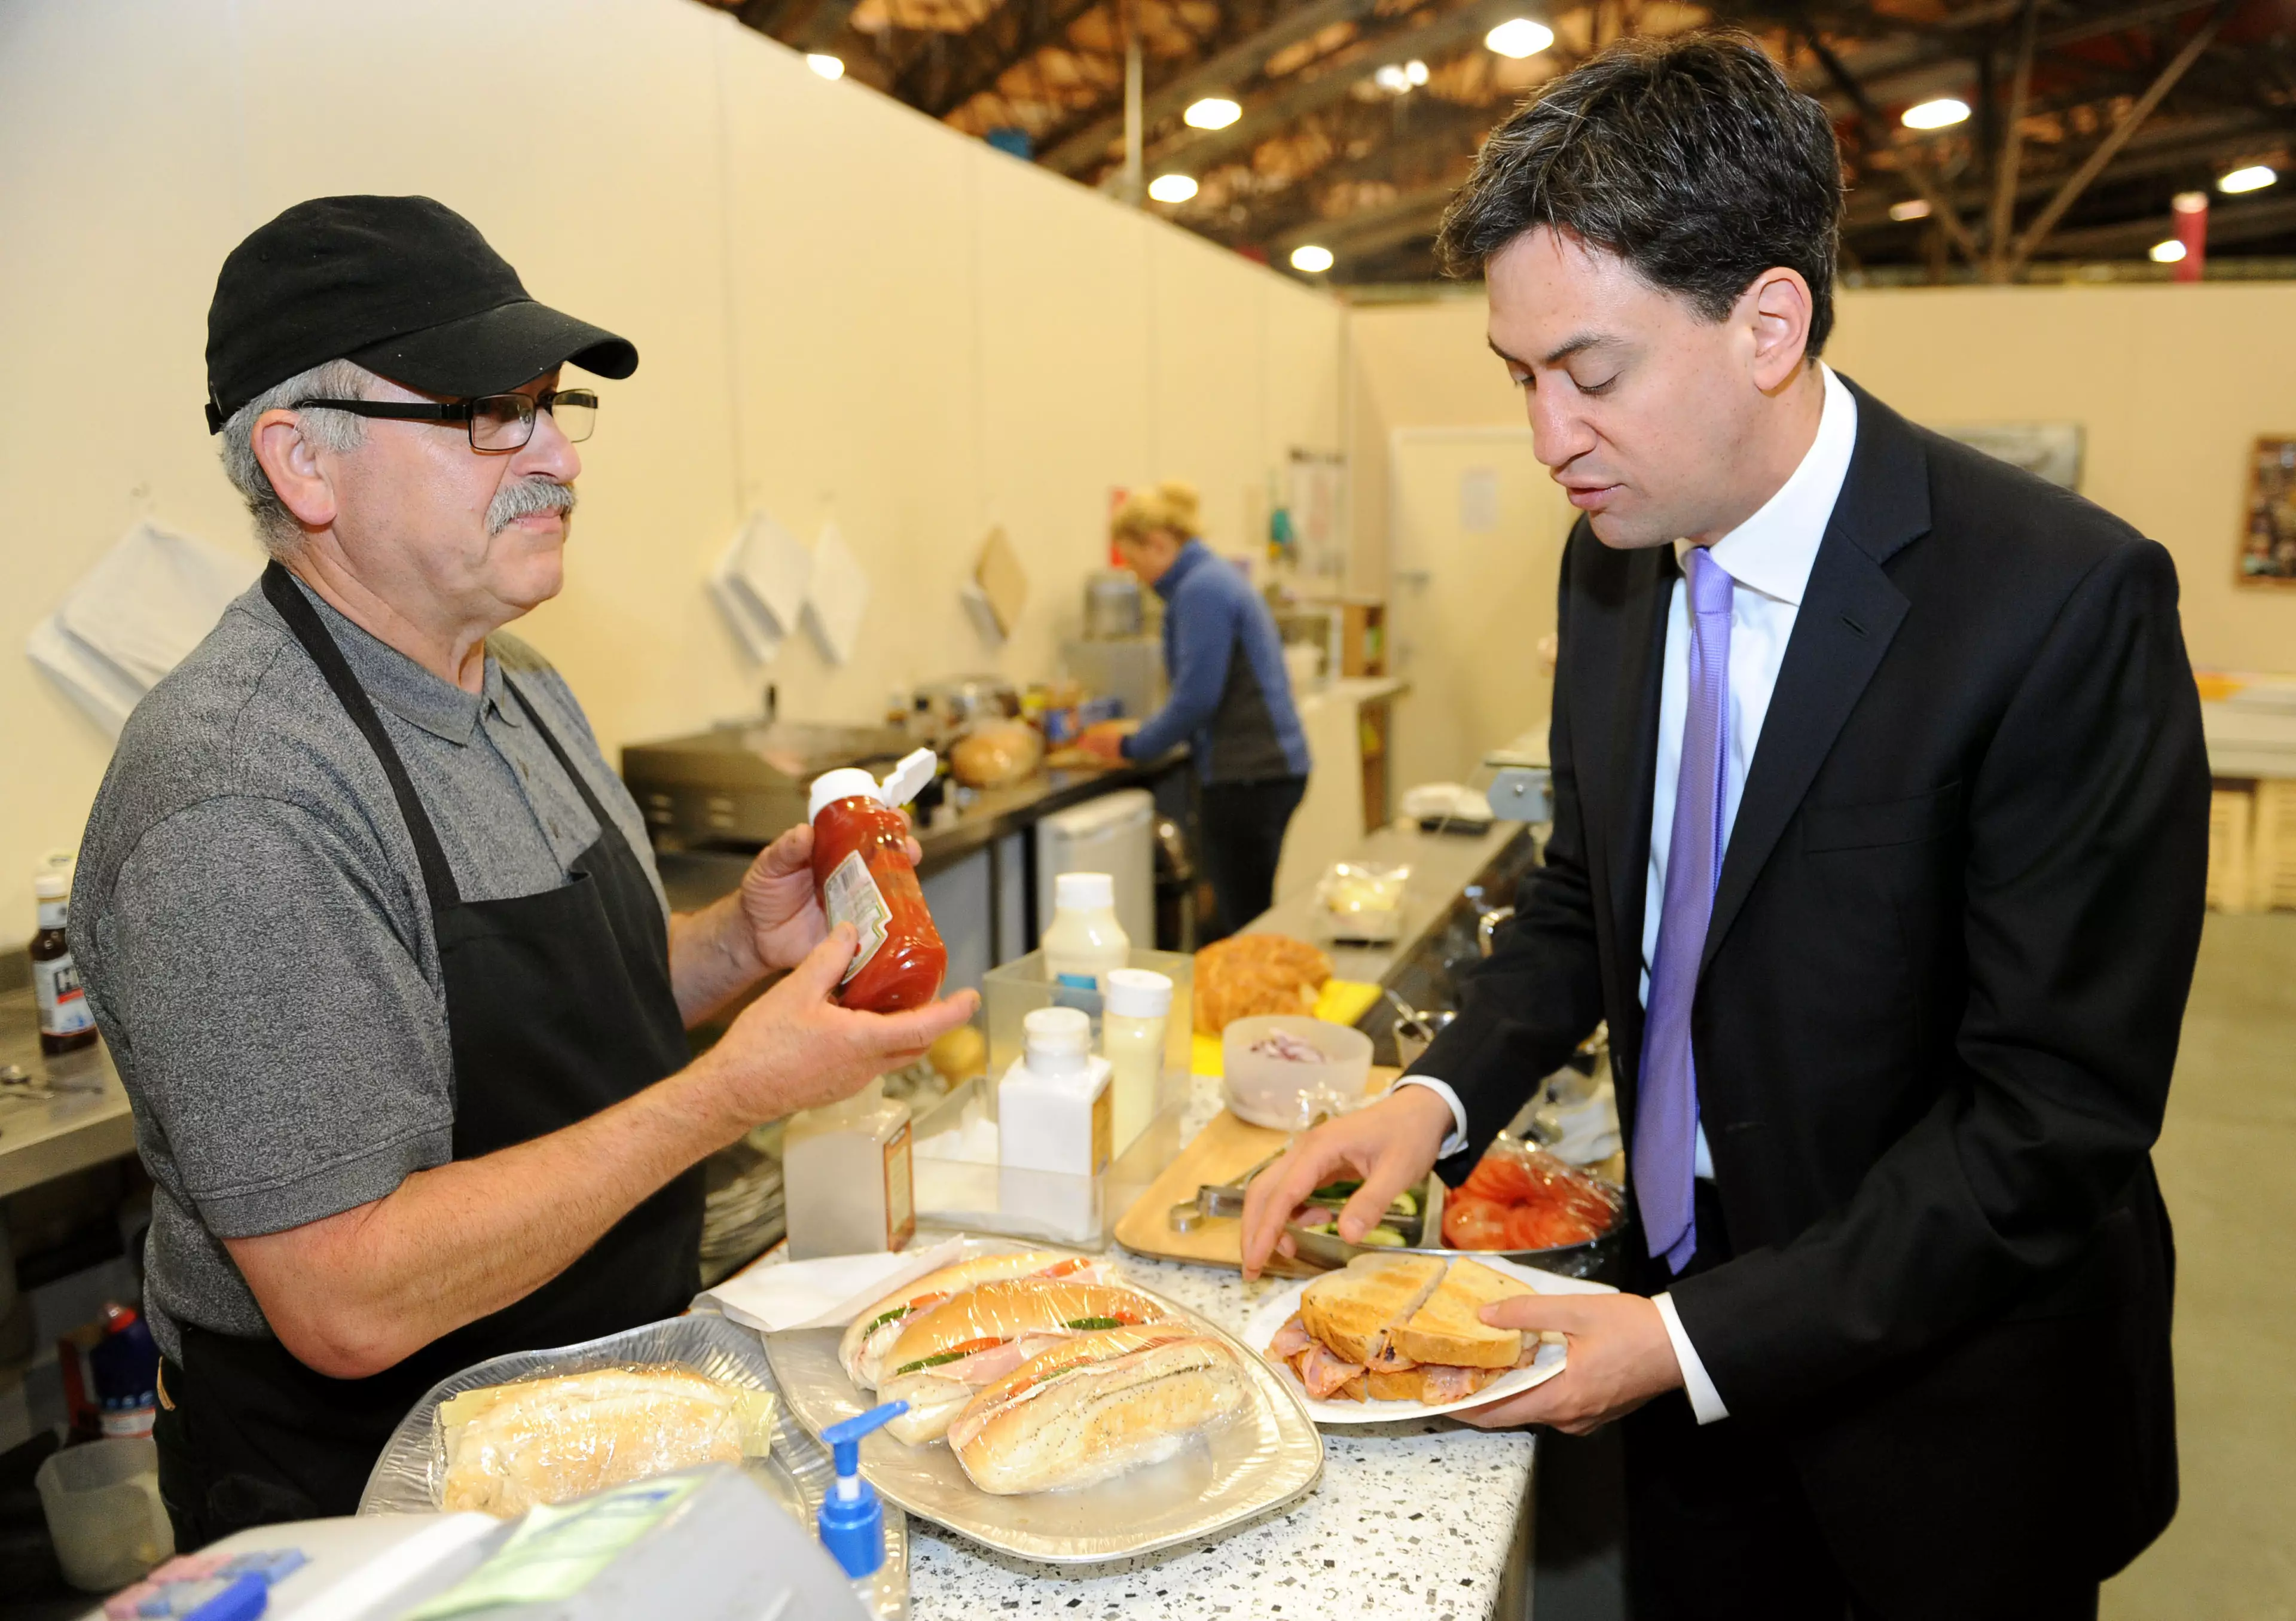 Miliband representing the red army.